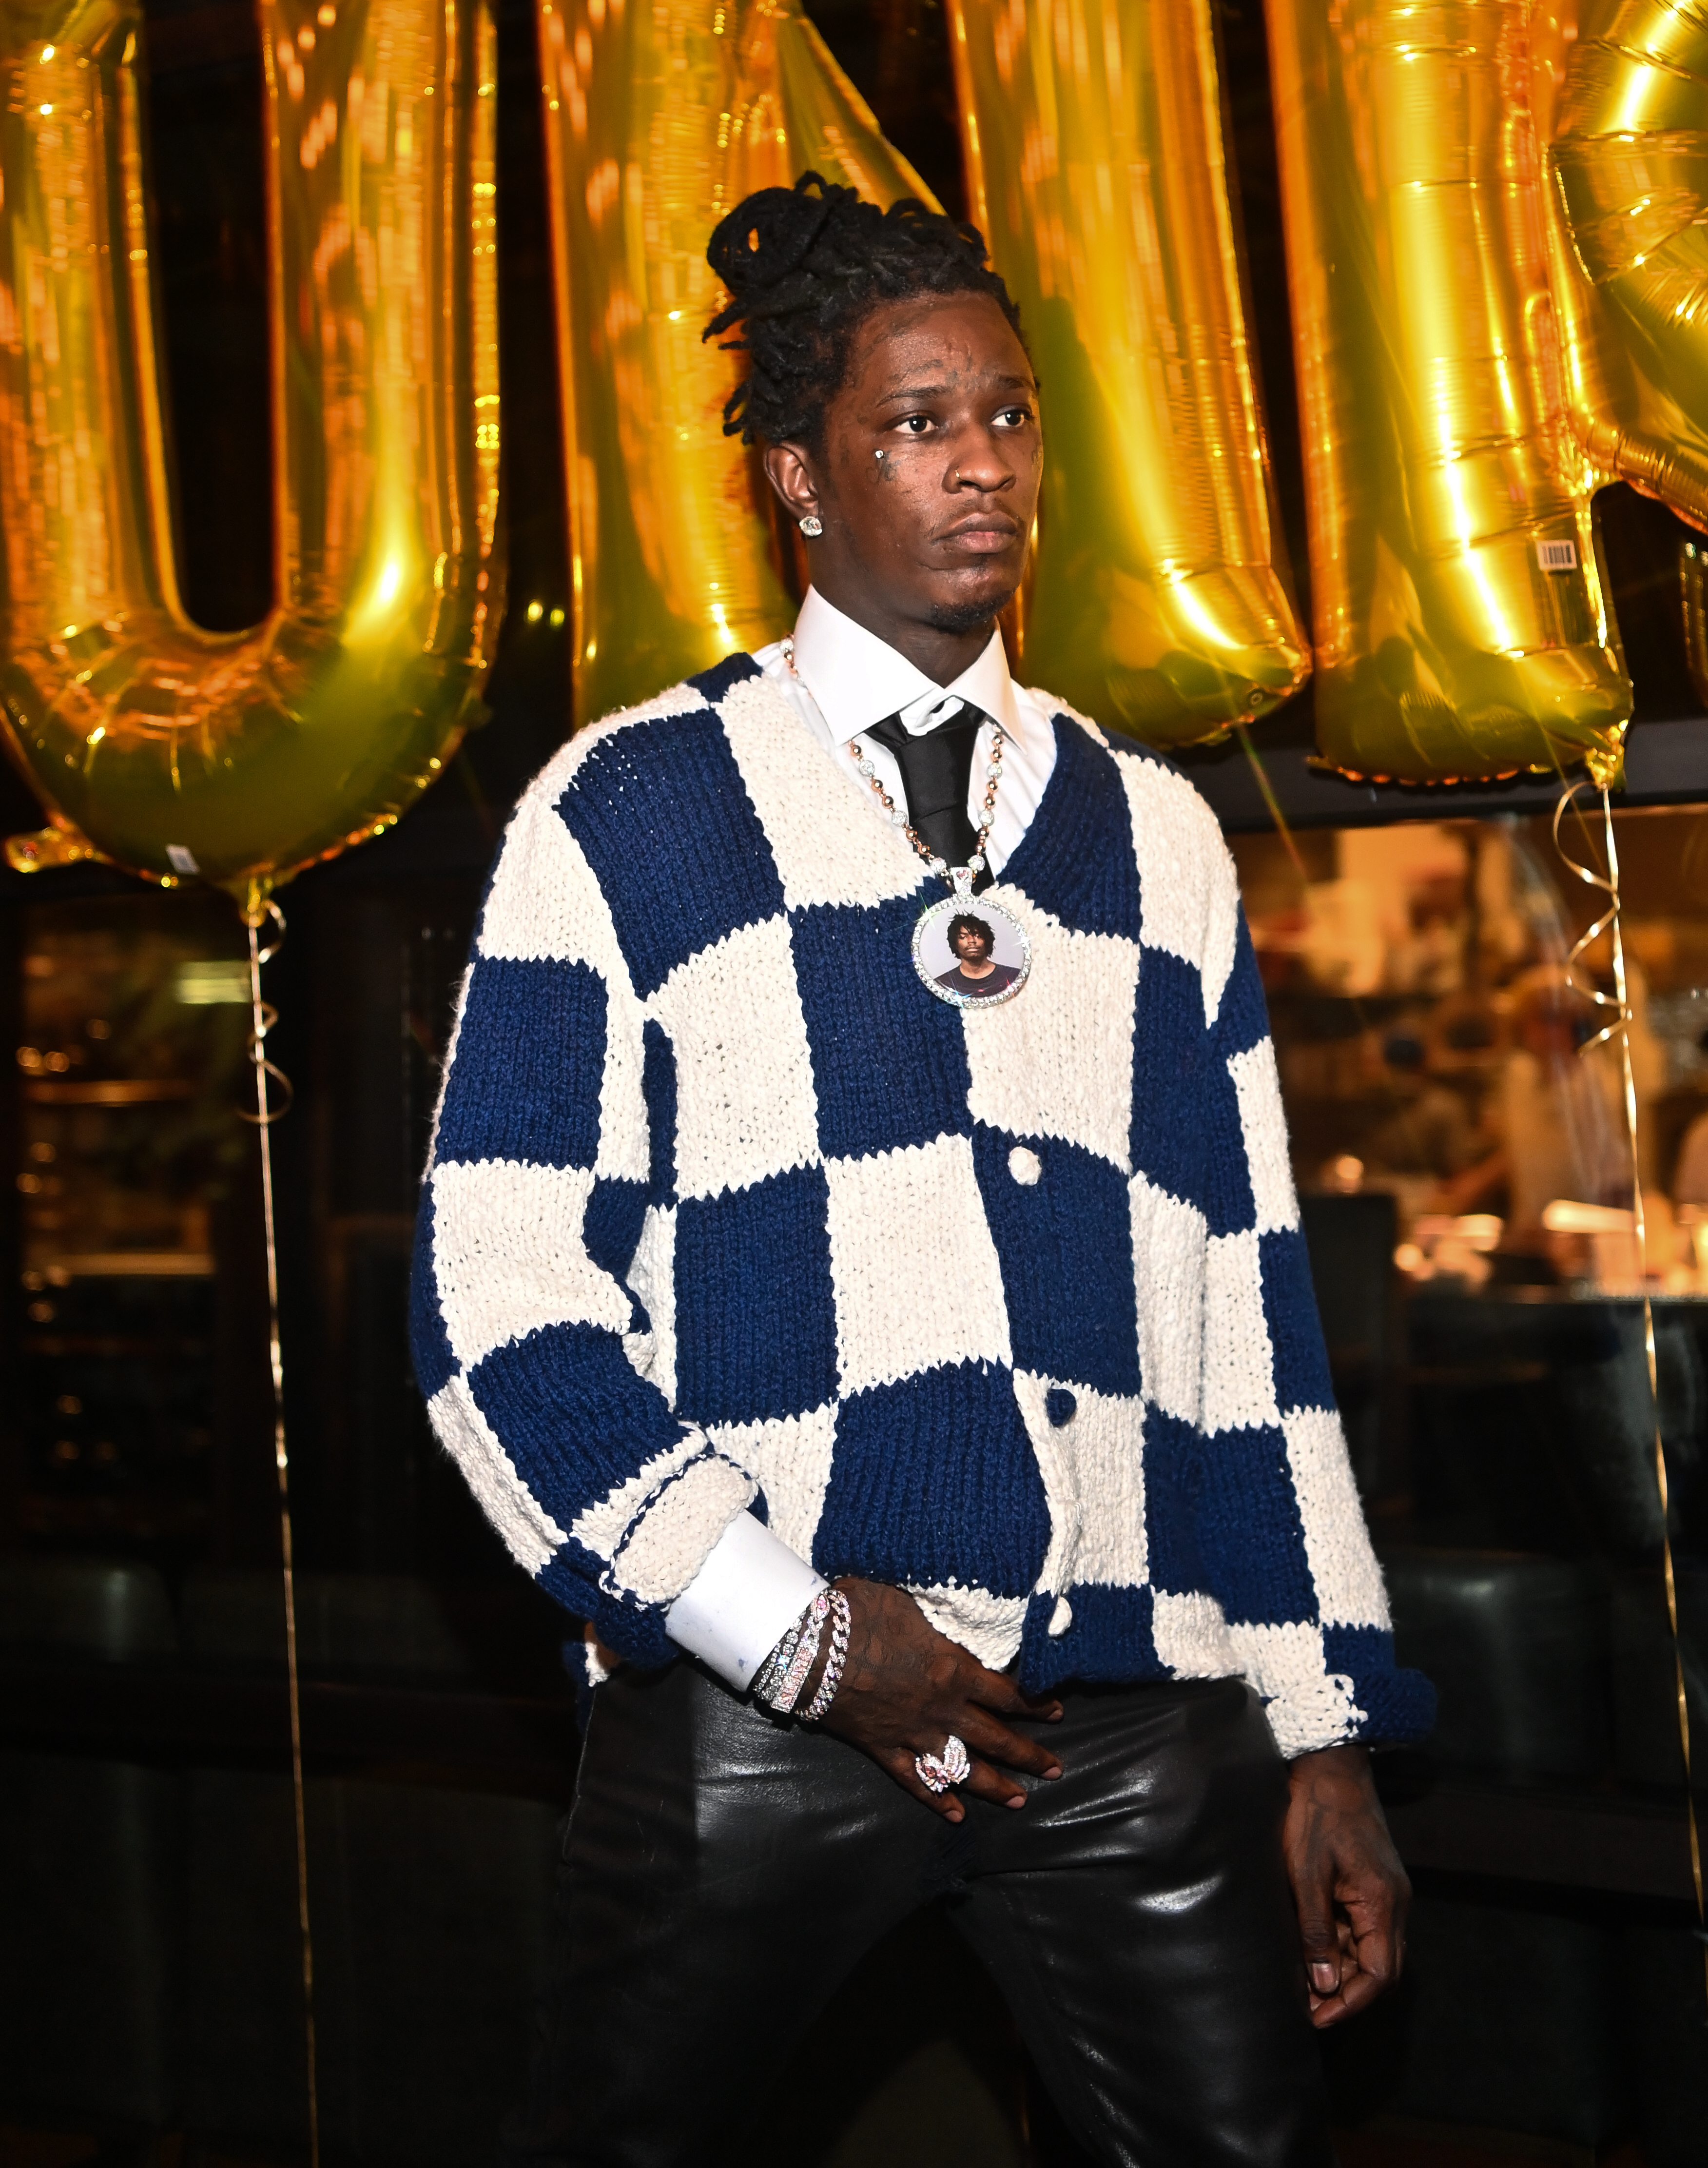 Young Thug attends a dinner celebrating his album "Punk" on October 25, 2021, in Atlanta, Georgia. | Source: Getty Images